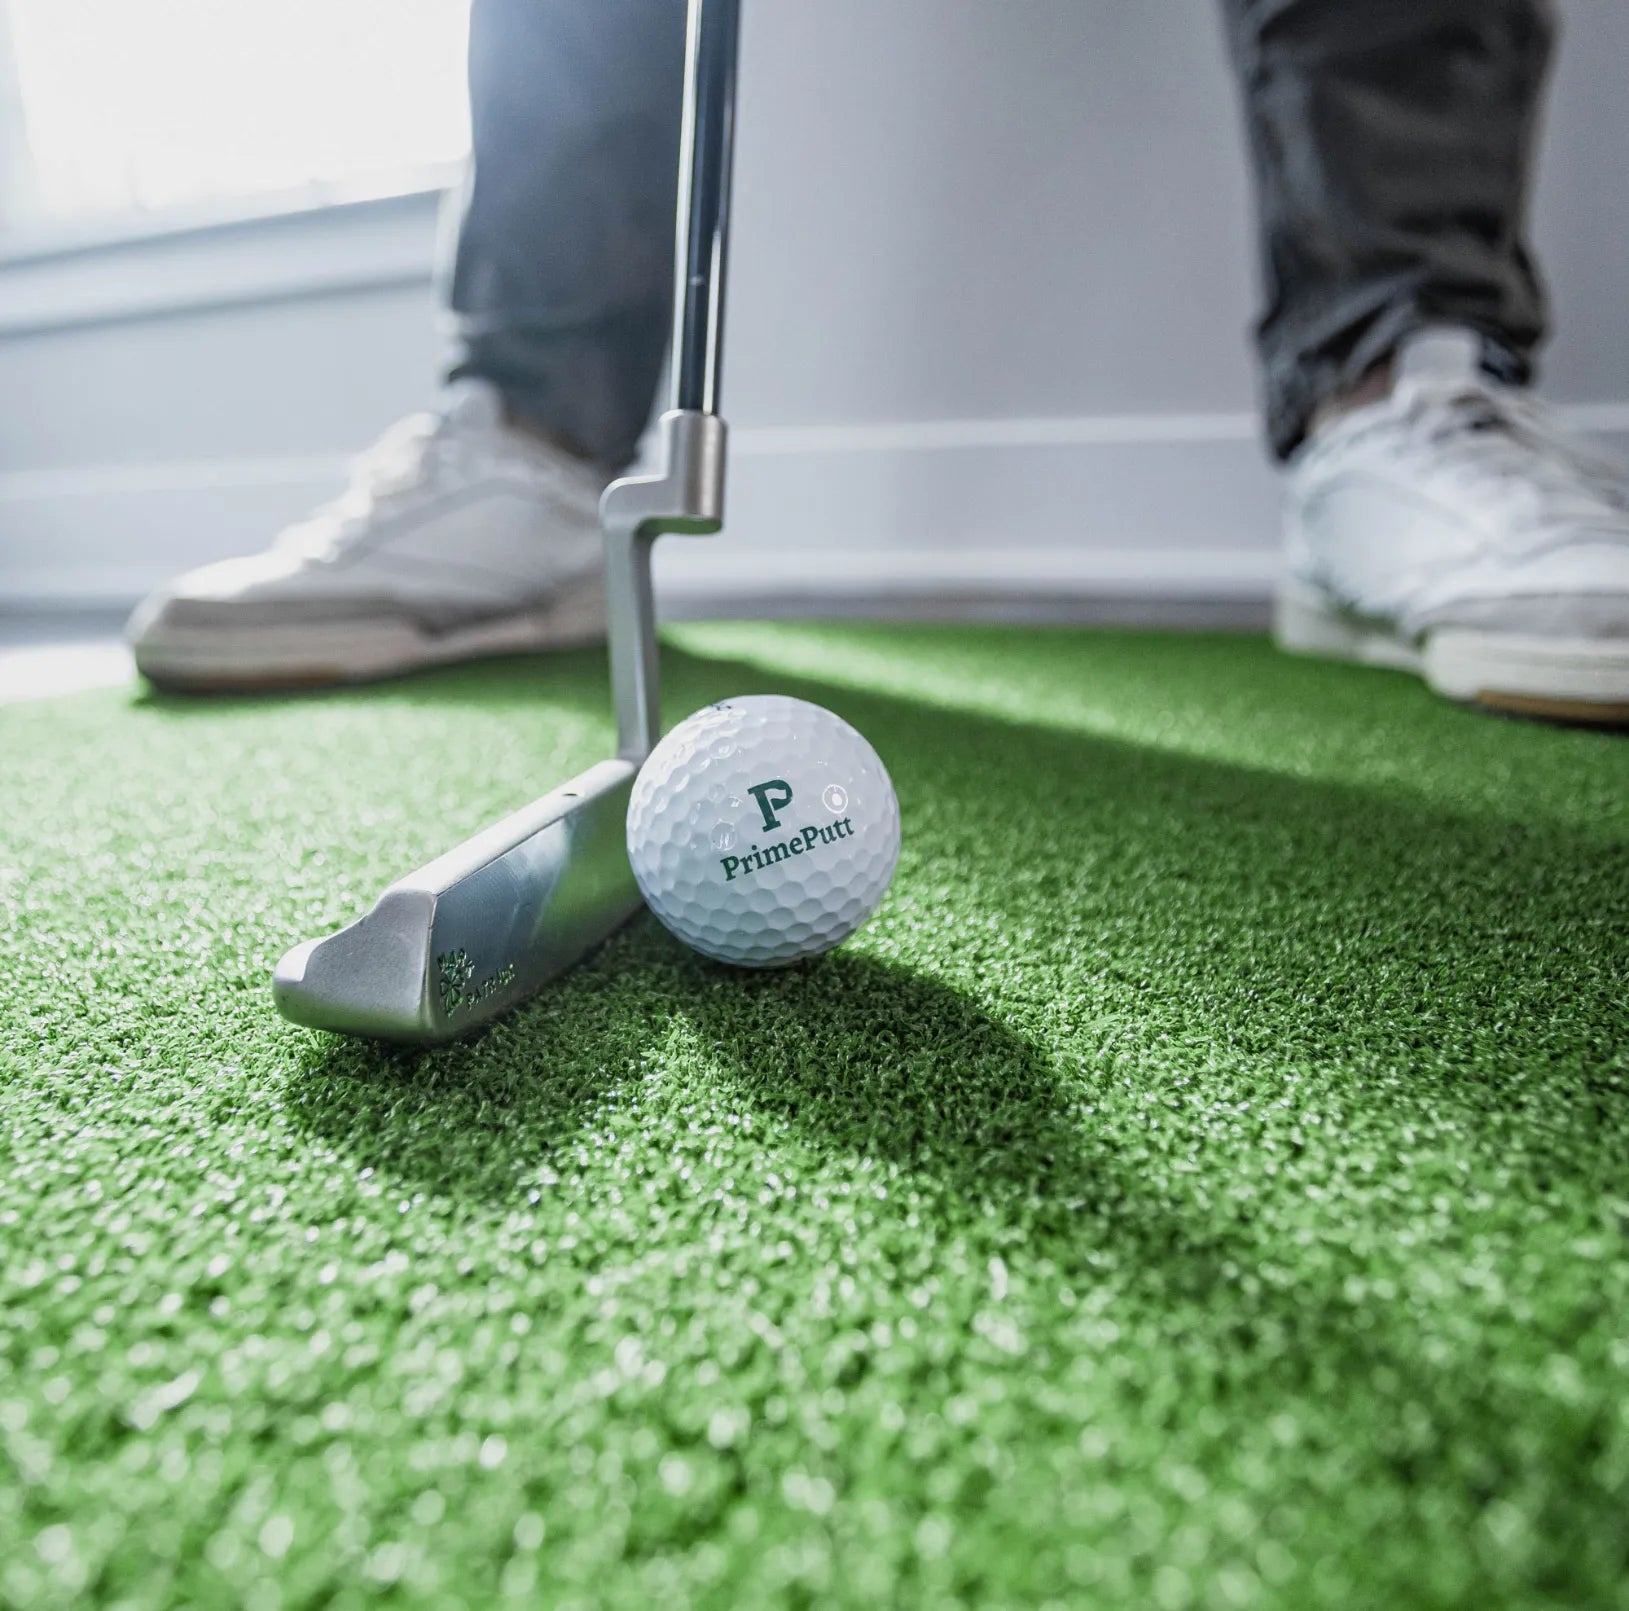 10 Expert Tips for Picking the Best Putter for Your Game – PrimePutt